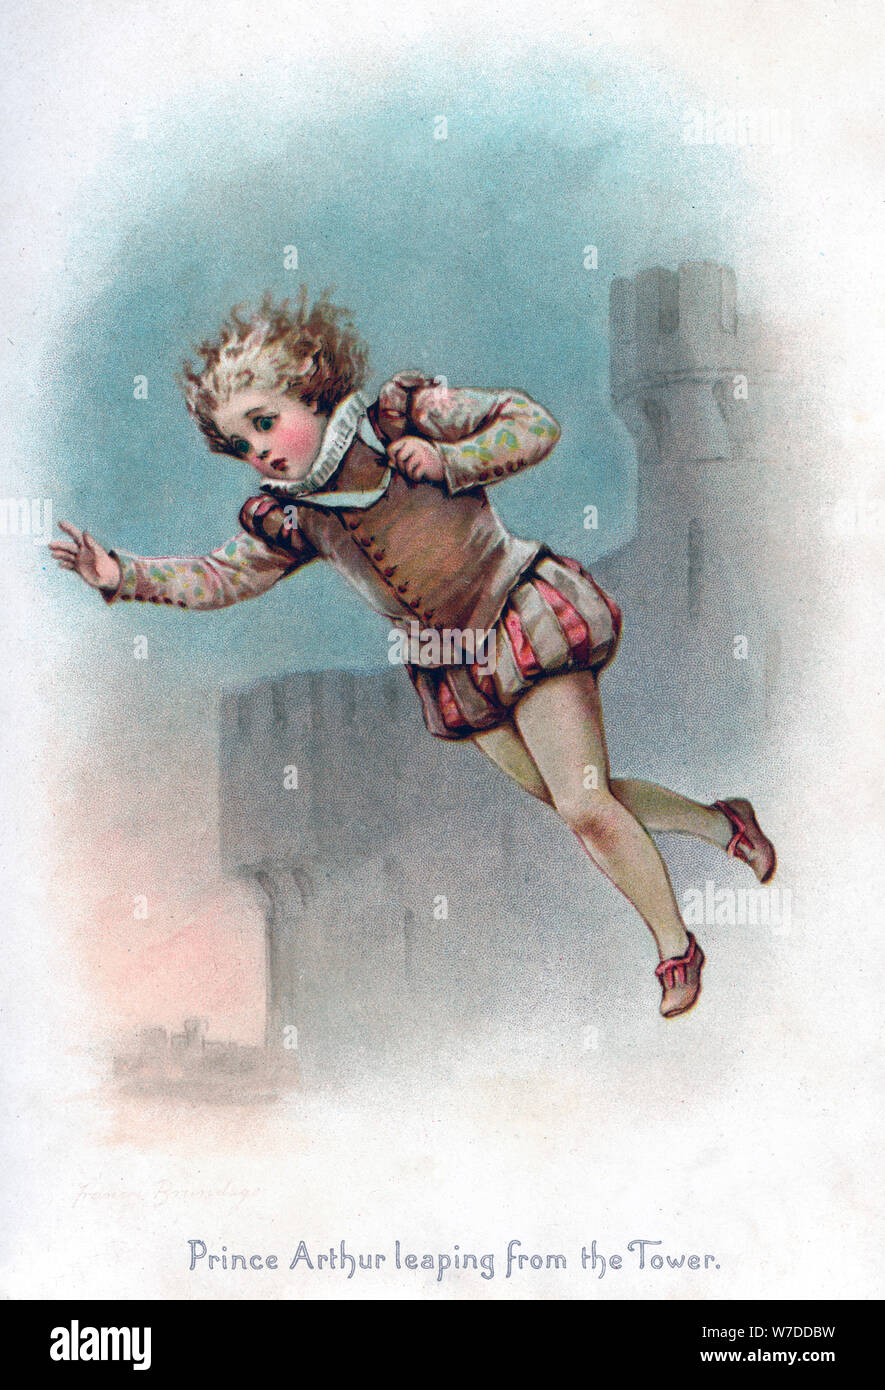 'Prince Arthur leaping from the Tower', 1897.Artist: Frances Brundage Stock Photo